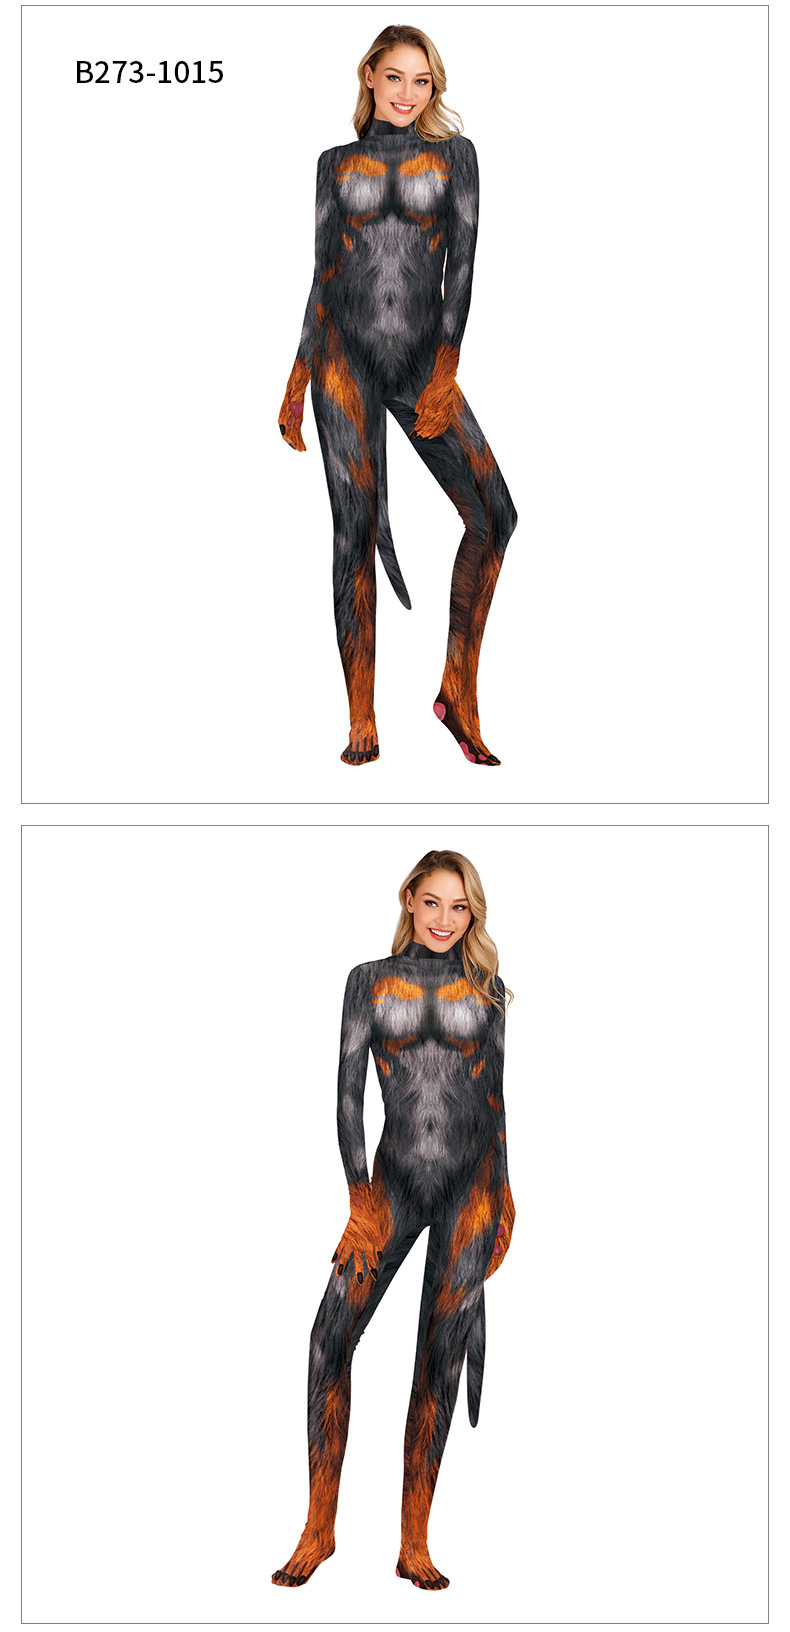 sexy women animal series 3d print catsuit with tail for halloween cosplay - model show